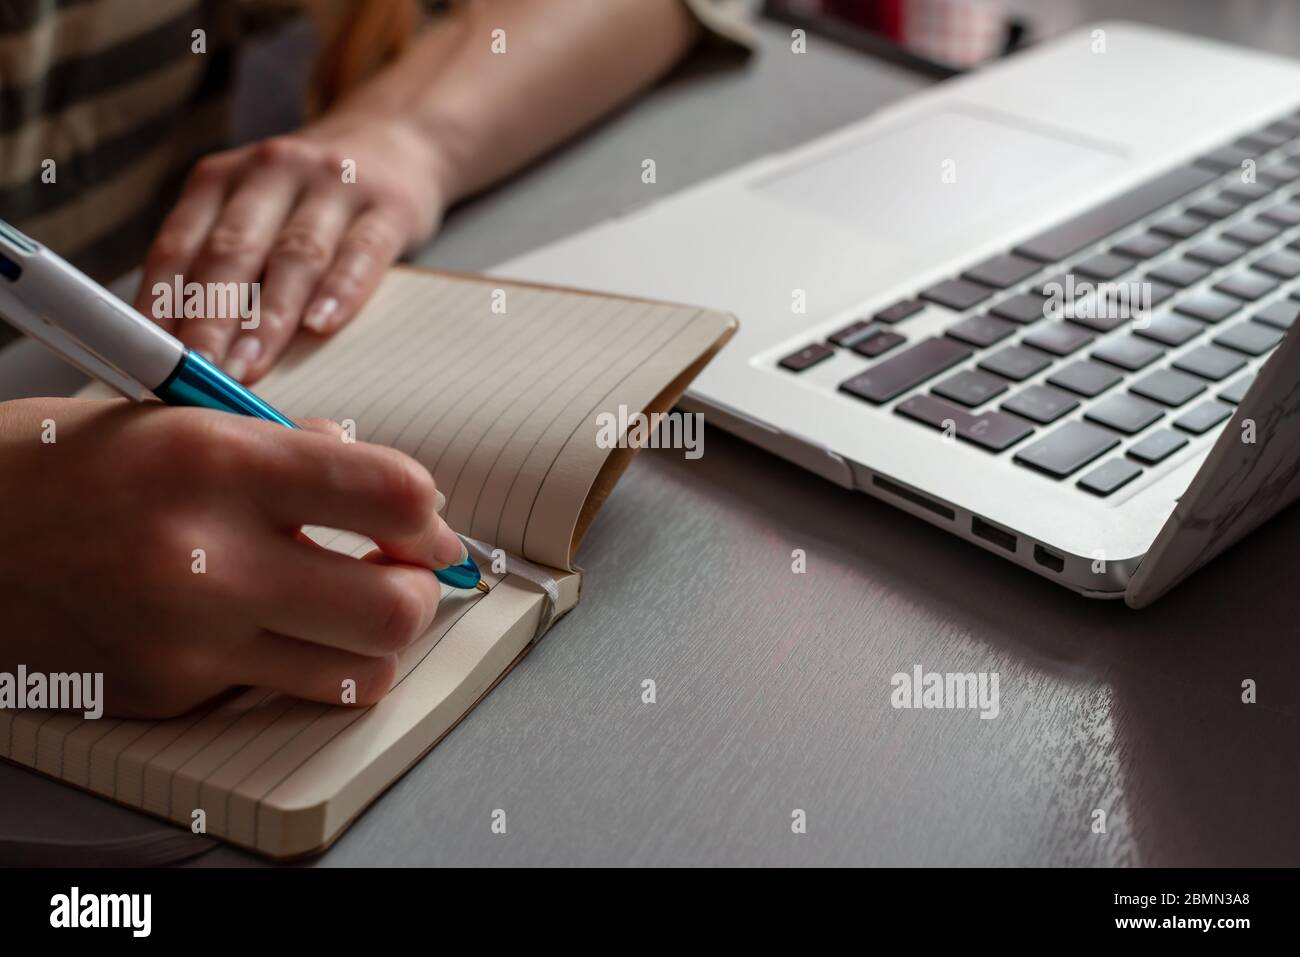 Young woman working at home, Student girl writing in note pad & looking at computer , online shopping, work or studying from home, freelance, online l Stock Photo